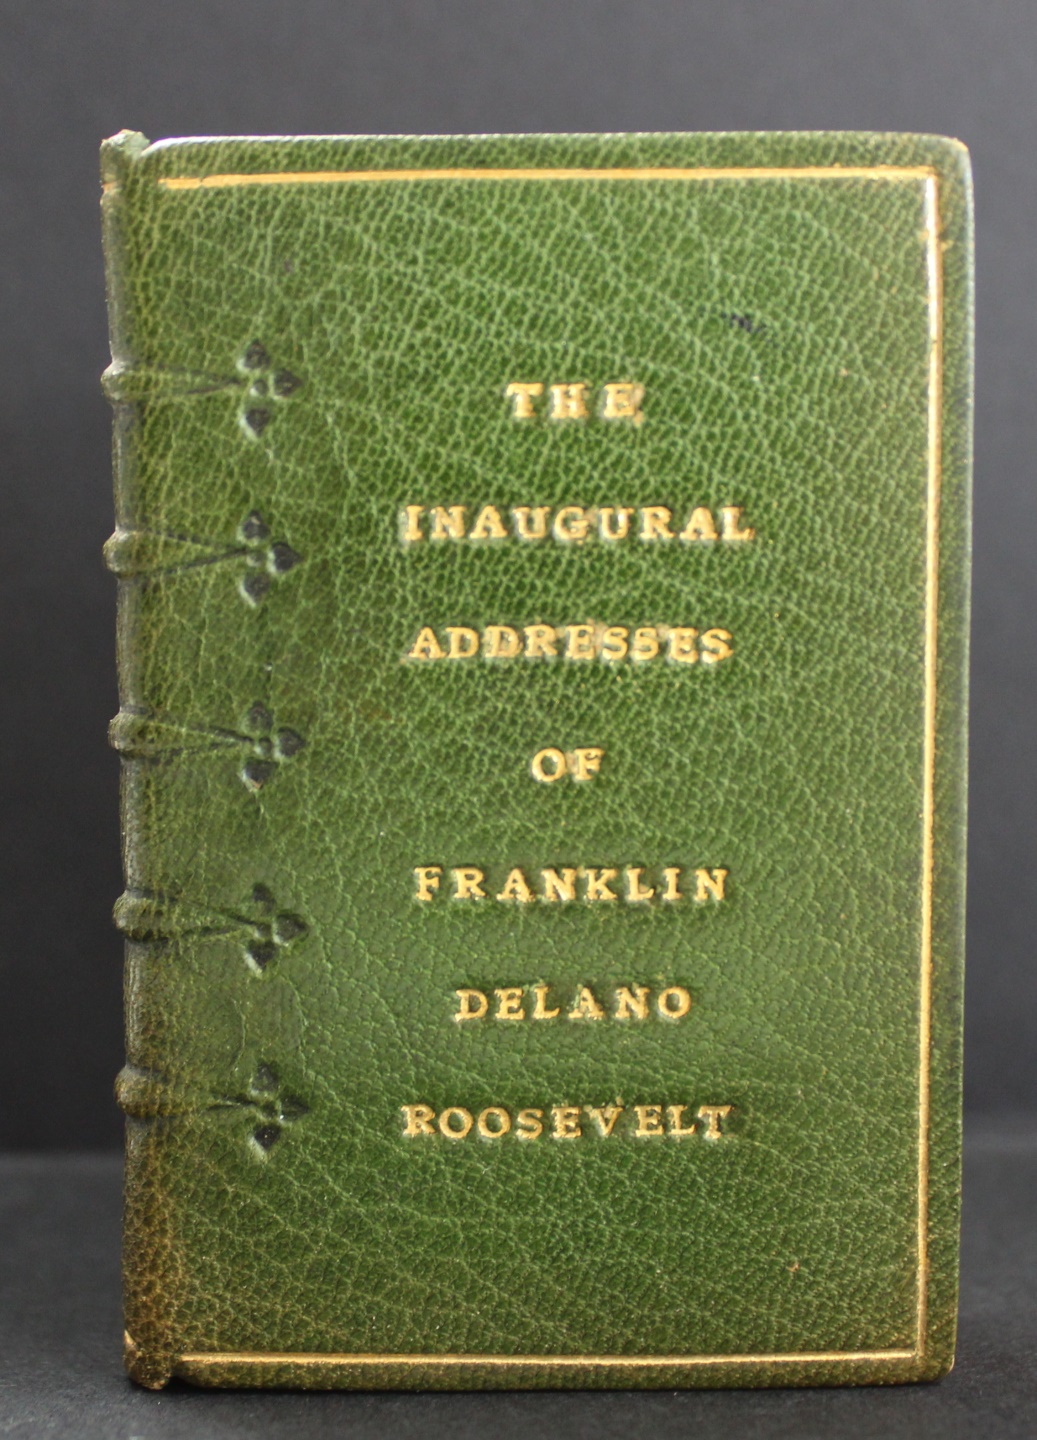 FDR THE INAUGURAL ADDRESS OF FRANKLIN 3b900a